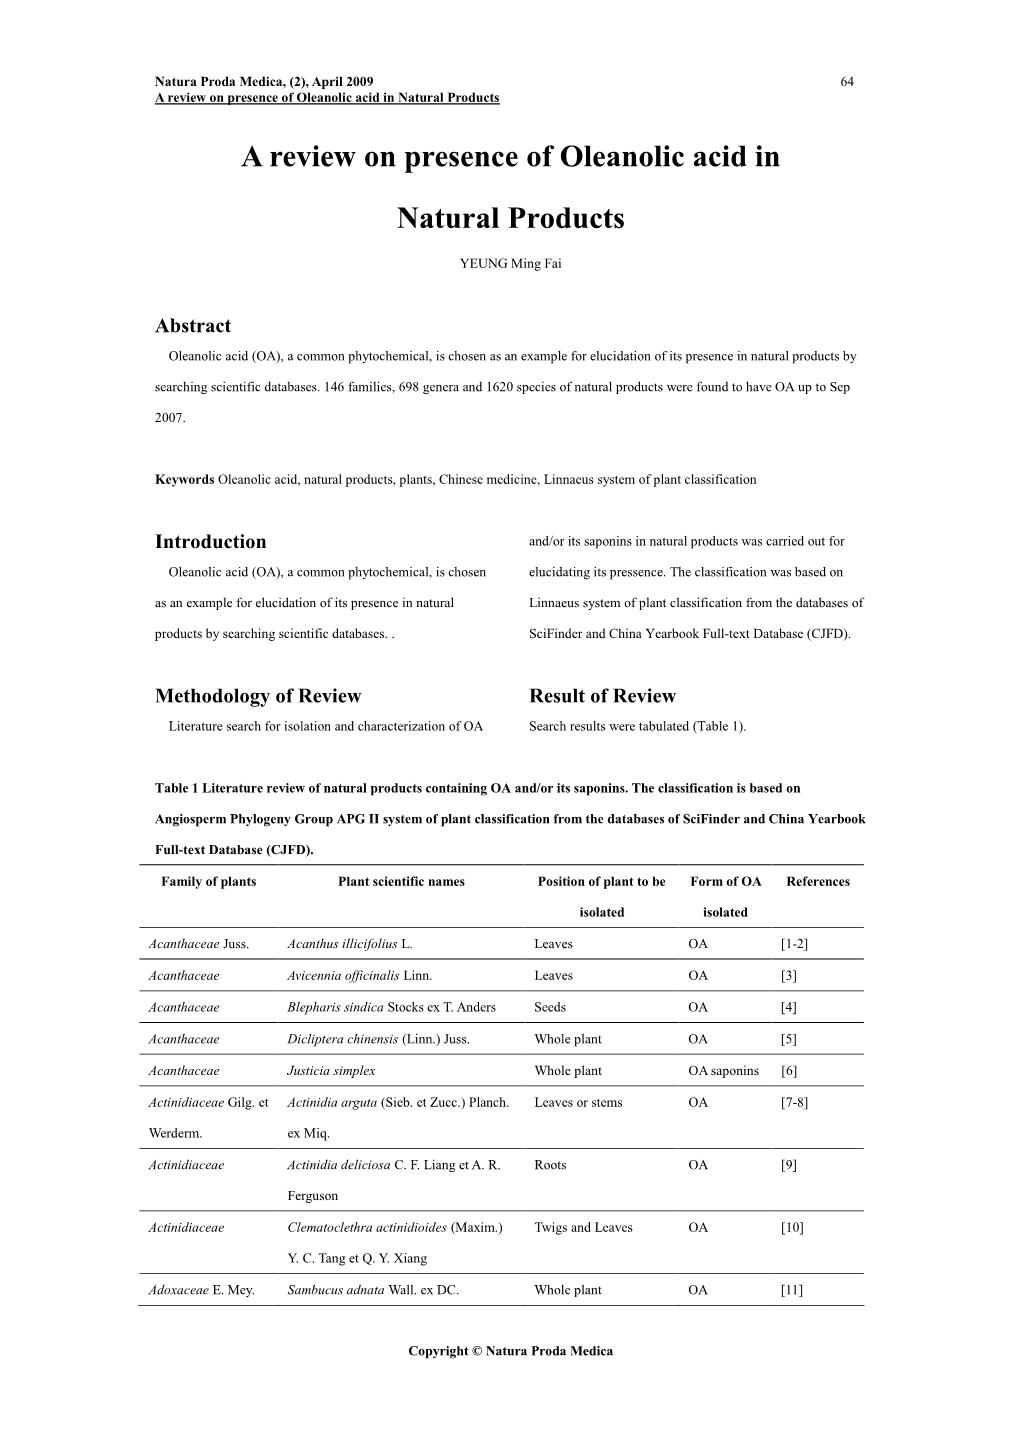 A Review on Presence of Oleanolic Acid in Natural Products